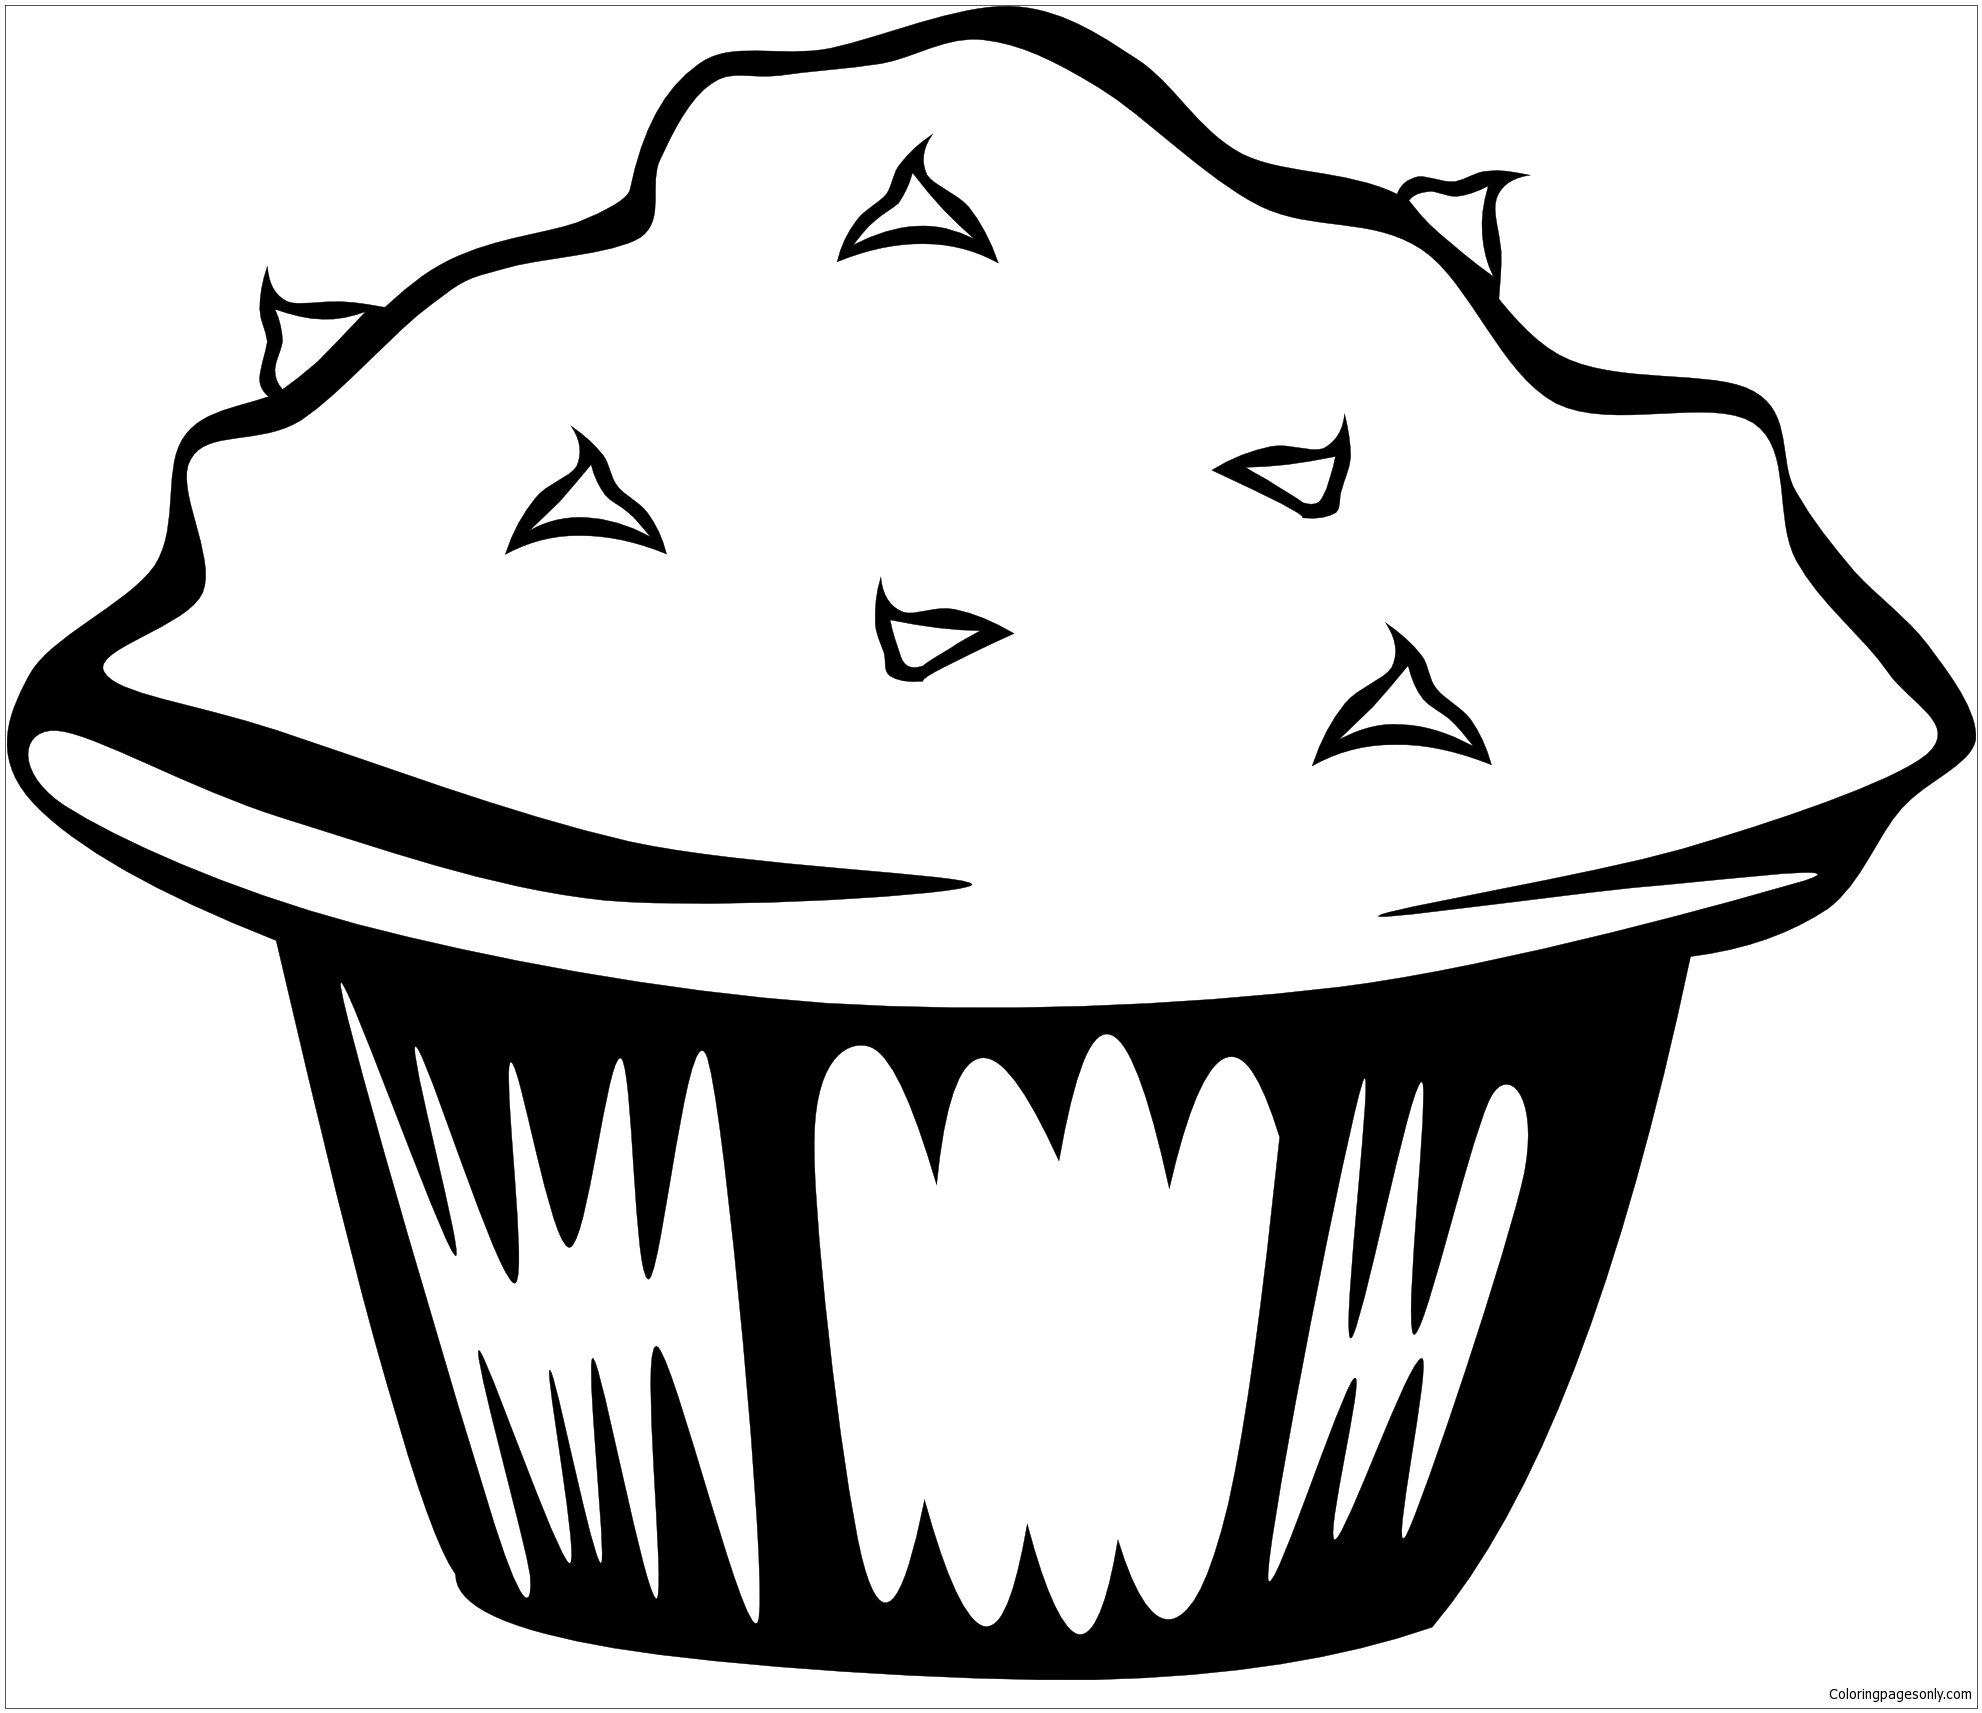 Download Blank Cake Birthday Coloring Page - Free Coloring Pages Online